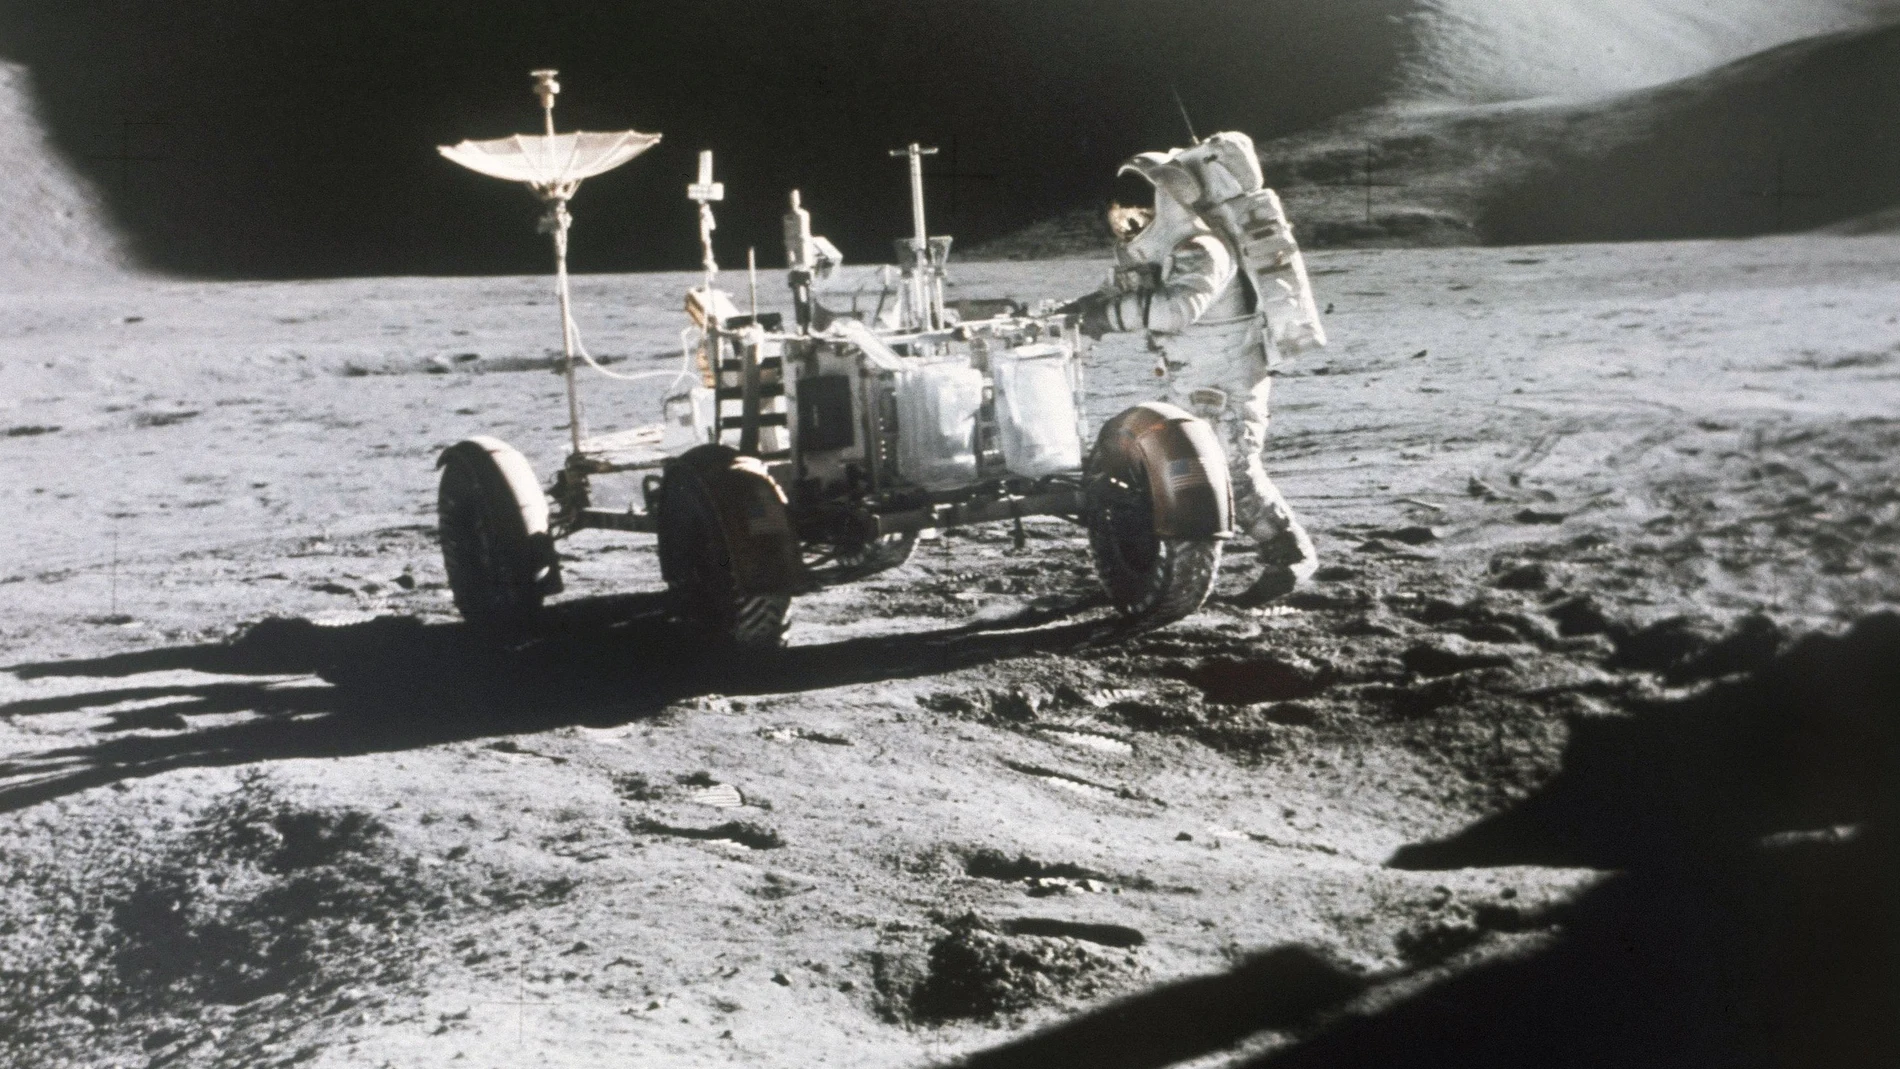 FILE - In this 1971 photo made available by NASA, astronaut James Irwin stands next to a rover on the surface of the moon. On Wednesday, May 26, 2021, Lockheed Martin and General Motors announced that they would combine their technological and manufacturing expertise to build the electric vehicles for NASAâ€™s Artemis program, named after the twin sister of Apollo in Greek mythology. (NASA via AP, File)